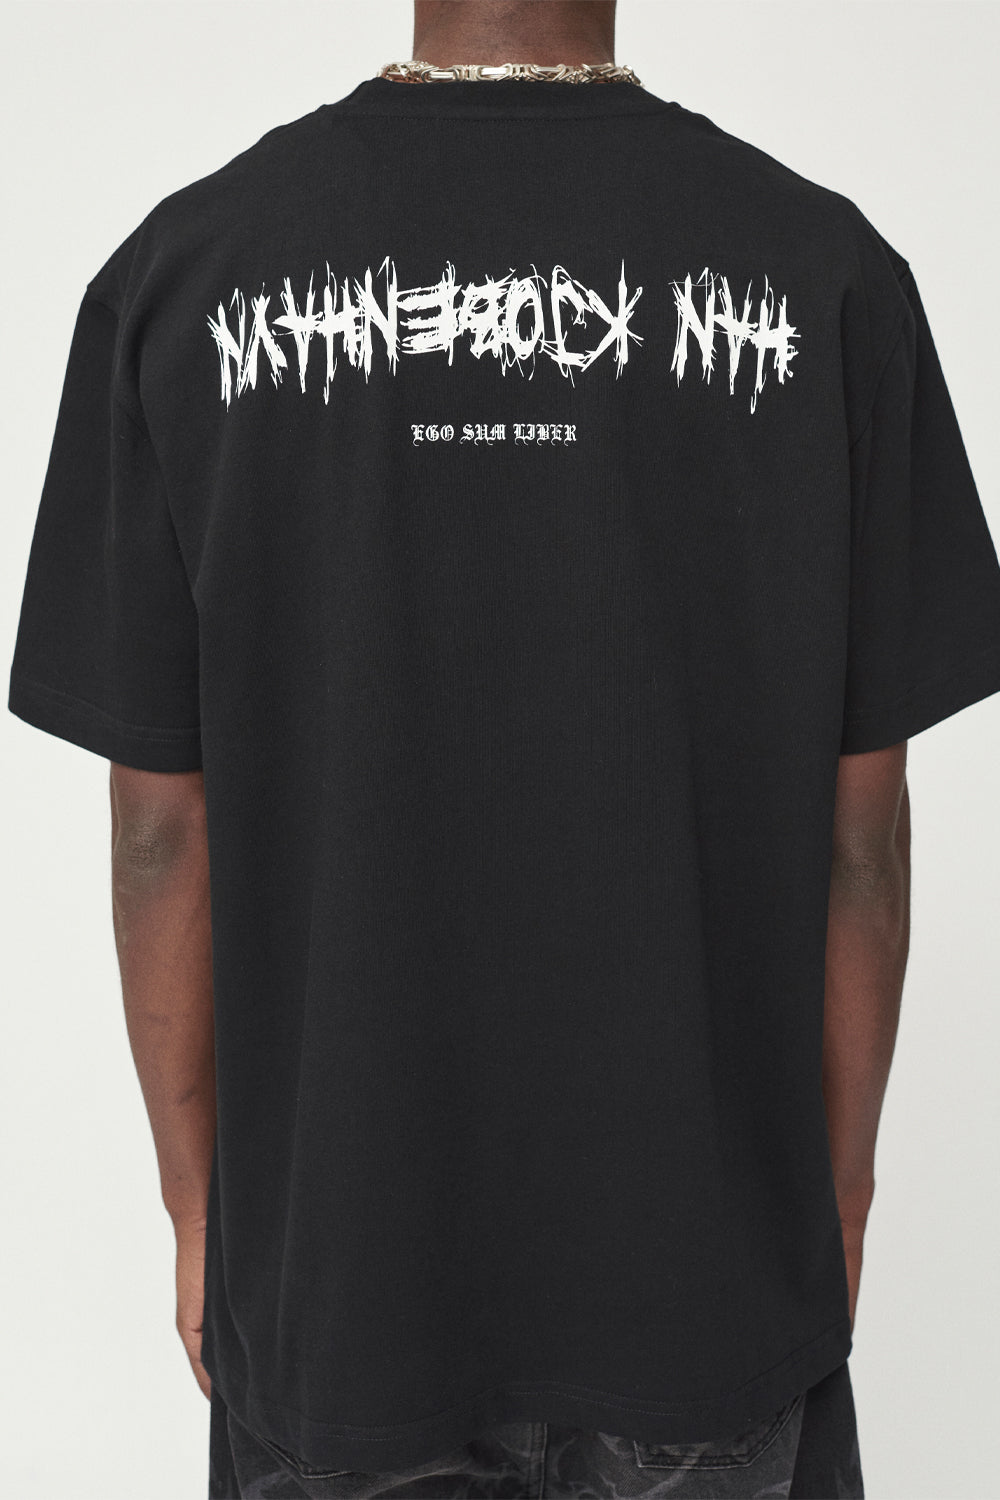 Buy the Han Kjobenhavn Upside Down Boxy T-Shirt in Black at Intro. Spend £50 for free UK delivery. Official stockists. We ship worldwide.